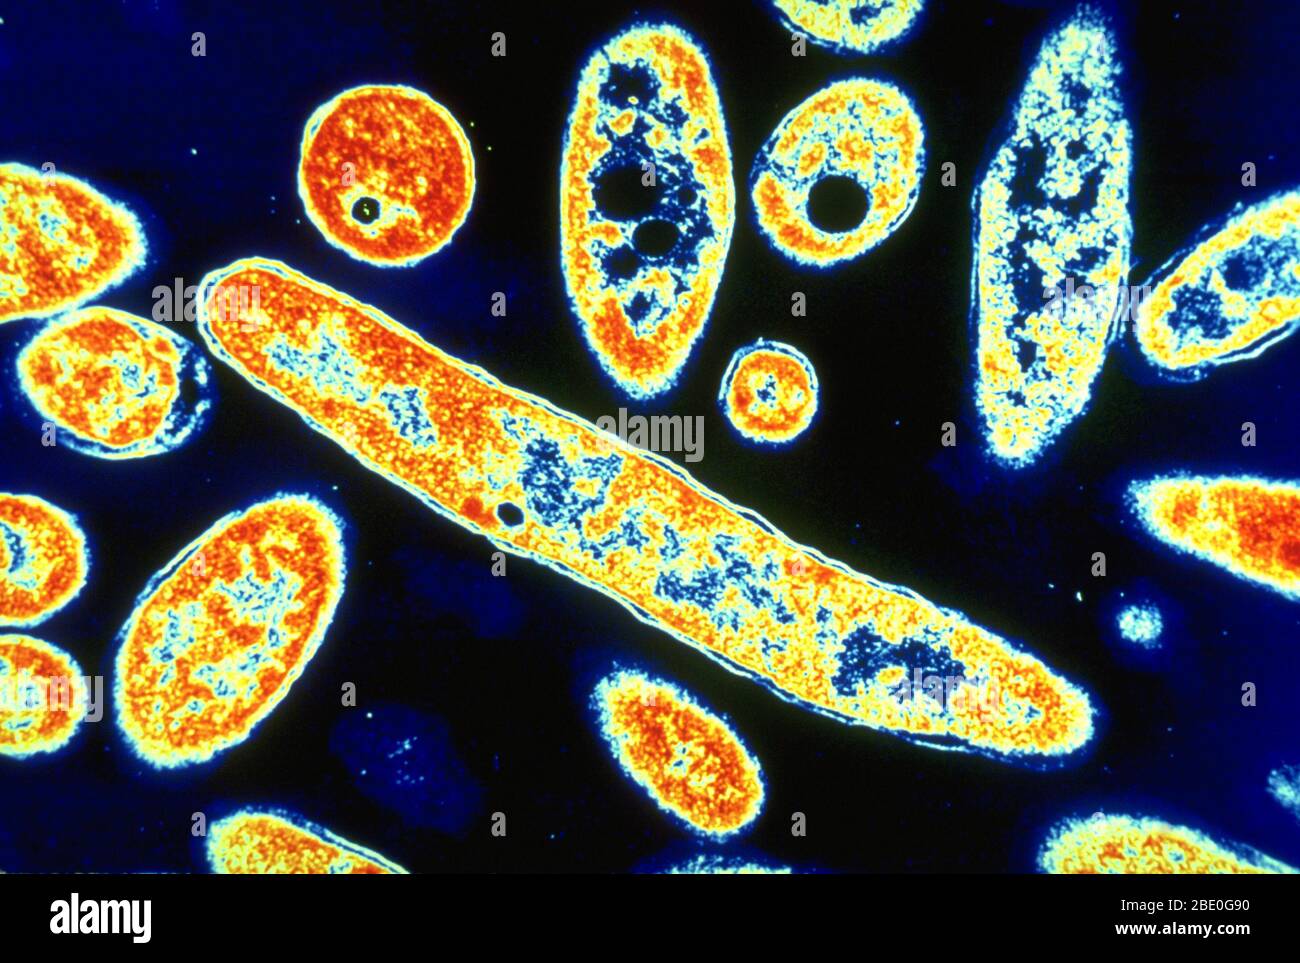 Color enhanced TEM of Legionnaires' disease bacteria (Legionella pneumophila) on bacteriologic medium with vacuoles present. TEM of Legionella pneumophila. Legionella pneumophila is a thin, aerobic, pleomorphic, flagellated, nonspore-forming, gram-negative bacterium of the genus Legionella. L. pneumophila is the primary human pathogenic bacterium in this group and is the causative agent of Legionnaires' disease, also known as legionellosis. The disease got its name in 1976 when an outbreak of pneumonia occurred at an American Legion convention in Philadelphia. Magnification @ 90,000x. Stock Photo